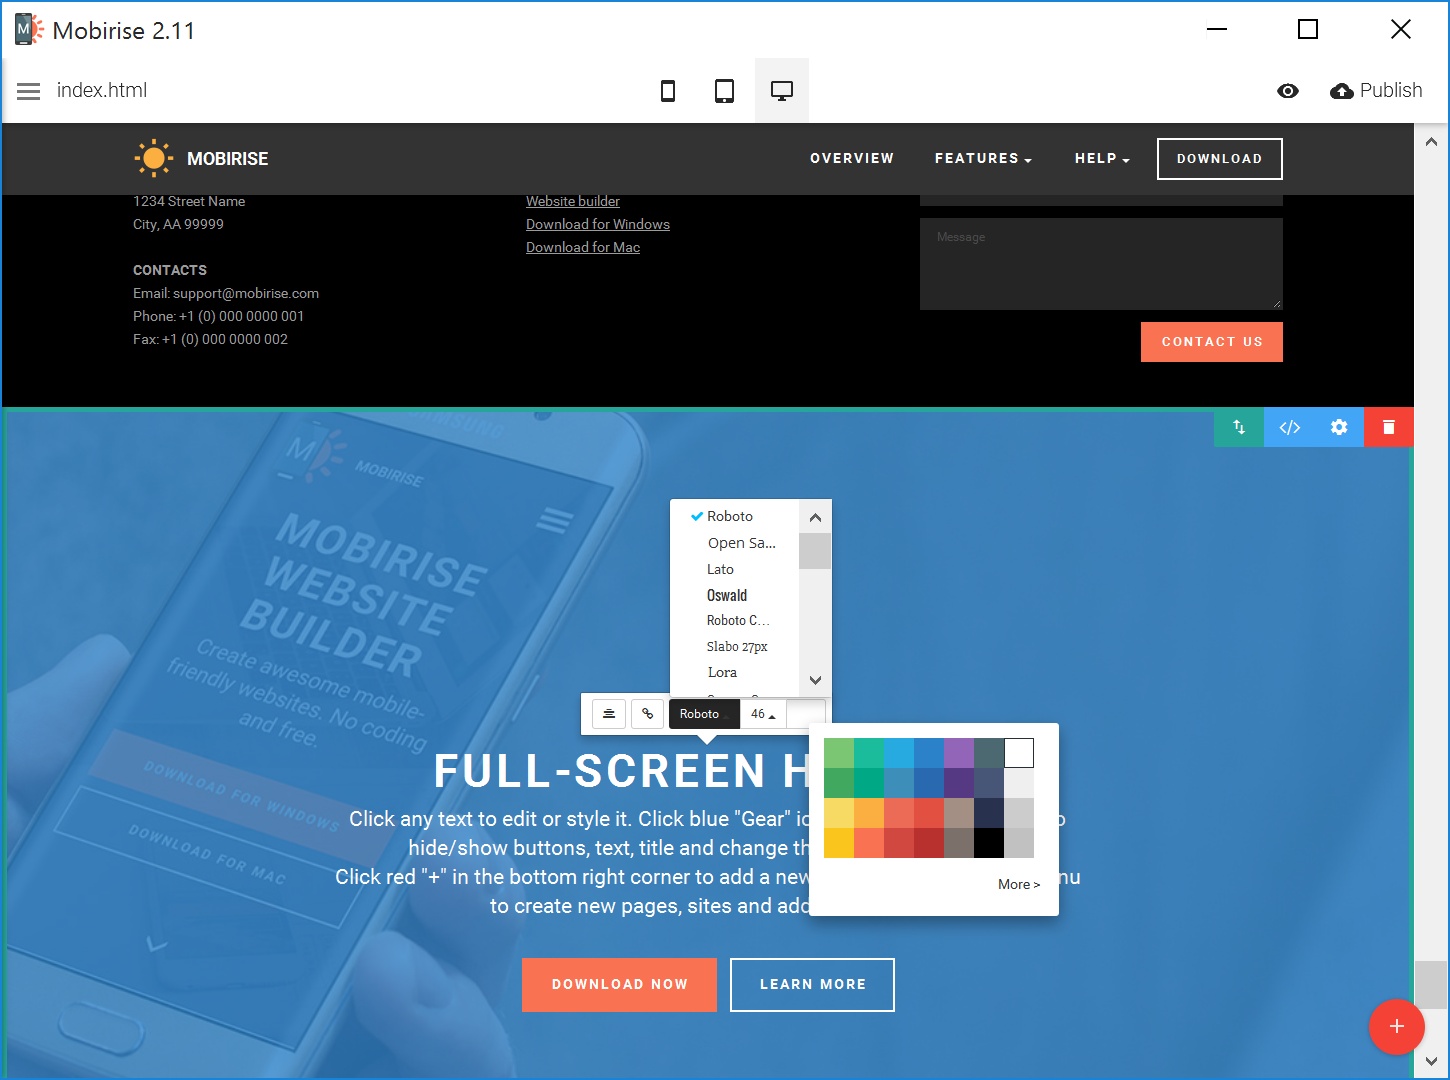 Free Responsive Web Page  Creator Software